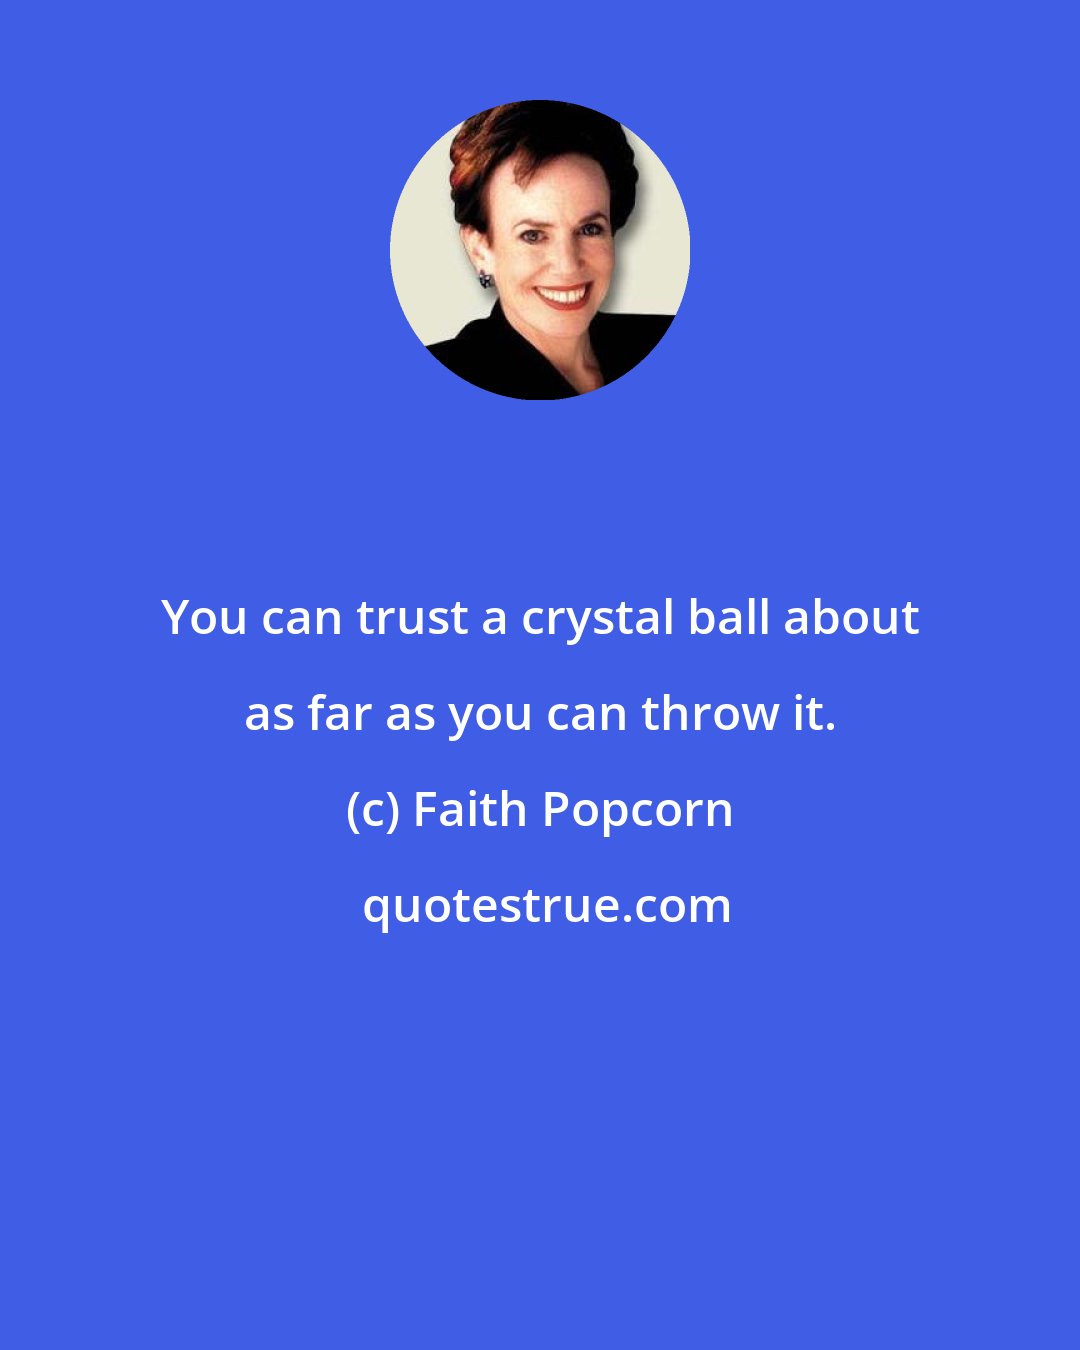 Faith Popcorn: You can trust a crystal ball about as far as you can throw it.